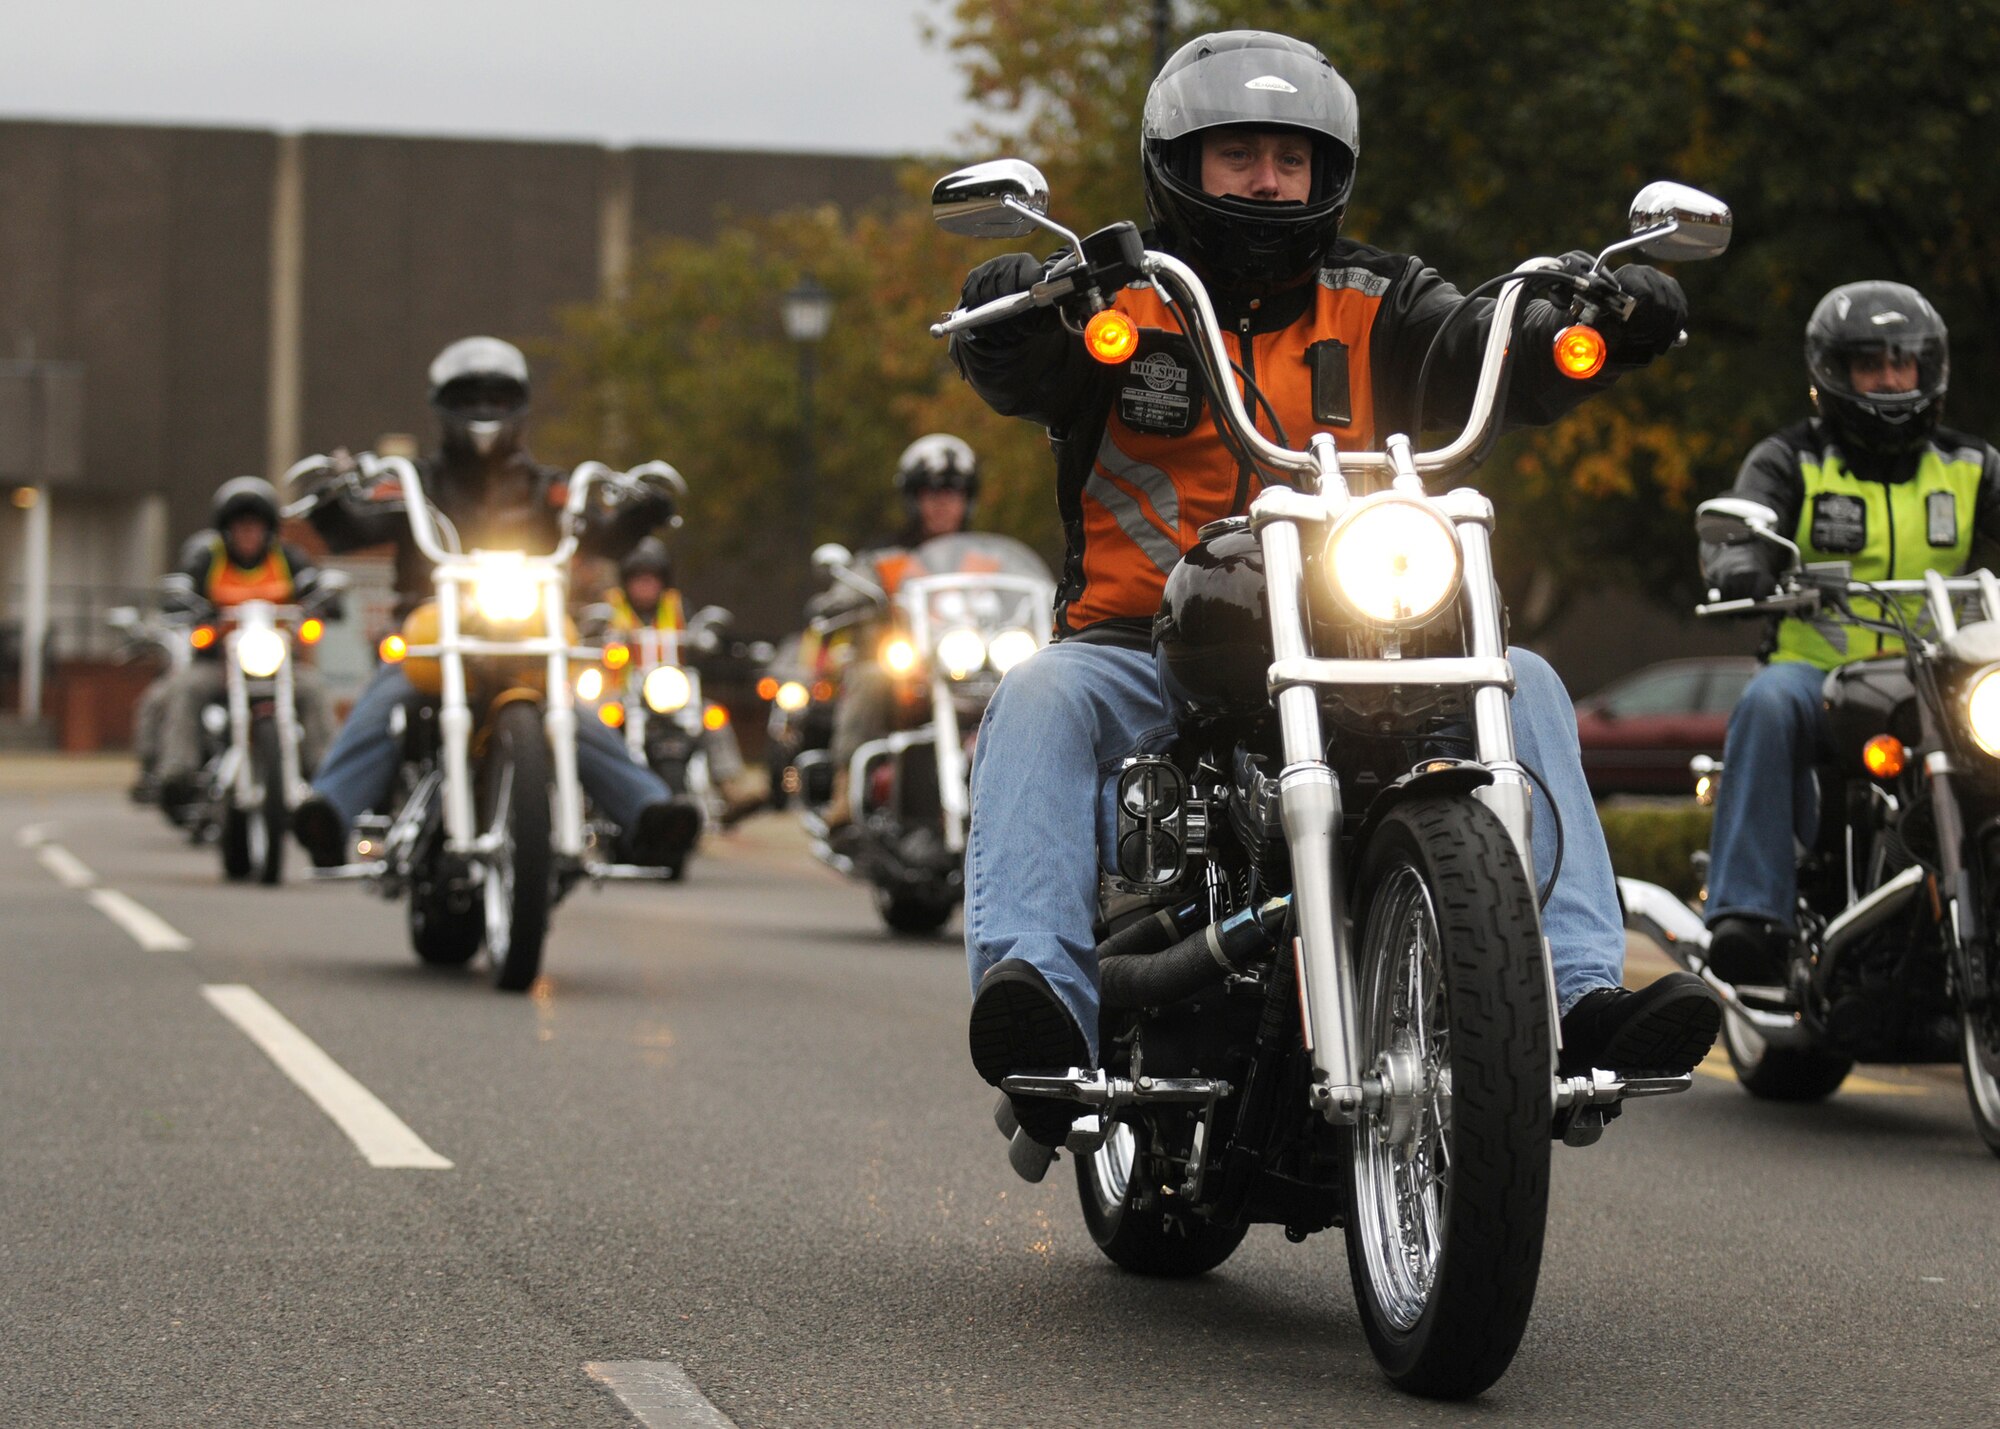 RAF MILDENHALL, England – A group of motorcyclist take part in the “Rolling Thunder” memorial ride from RAF Mildenhall to RAF Lakenheath Sept. 15. The ride was in observance of POW/MIA remembrance week. (U.S. Air Force photo/ Staff Sgt. Jerry Fleshman)